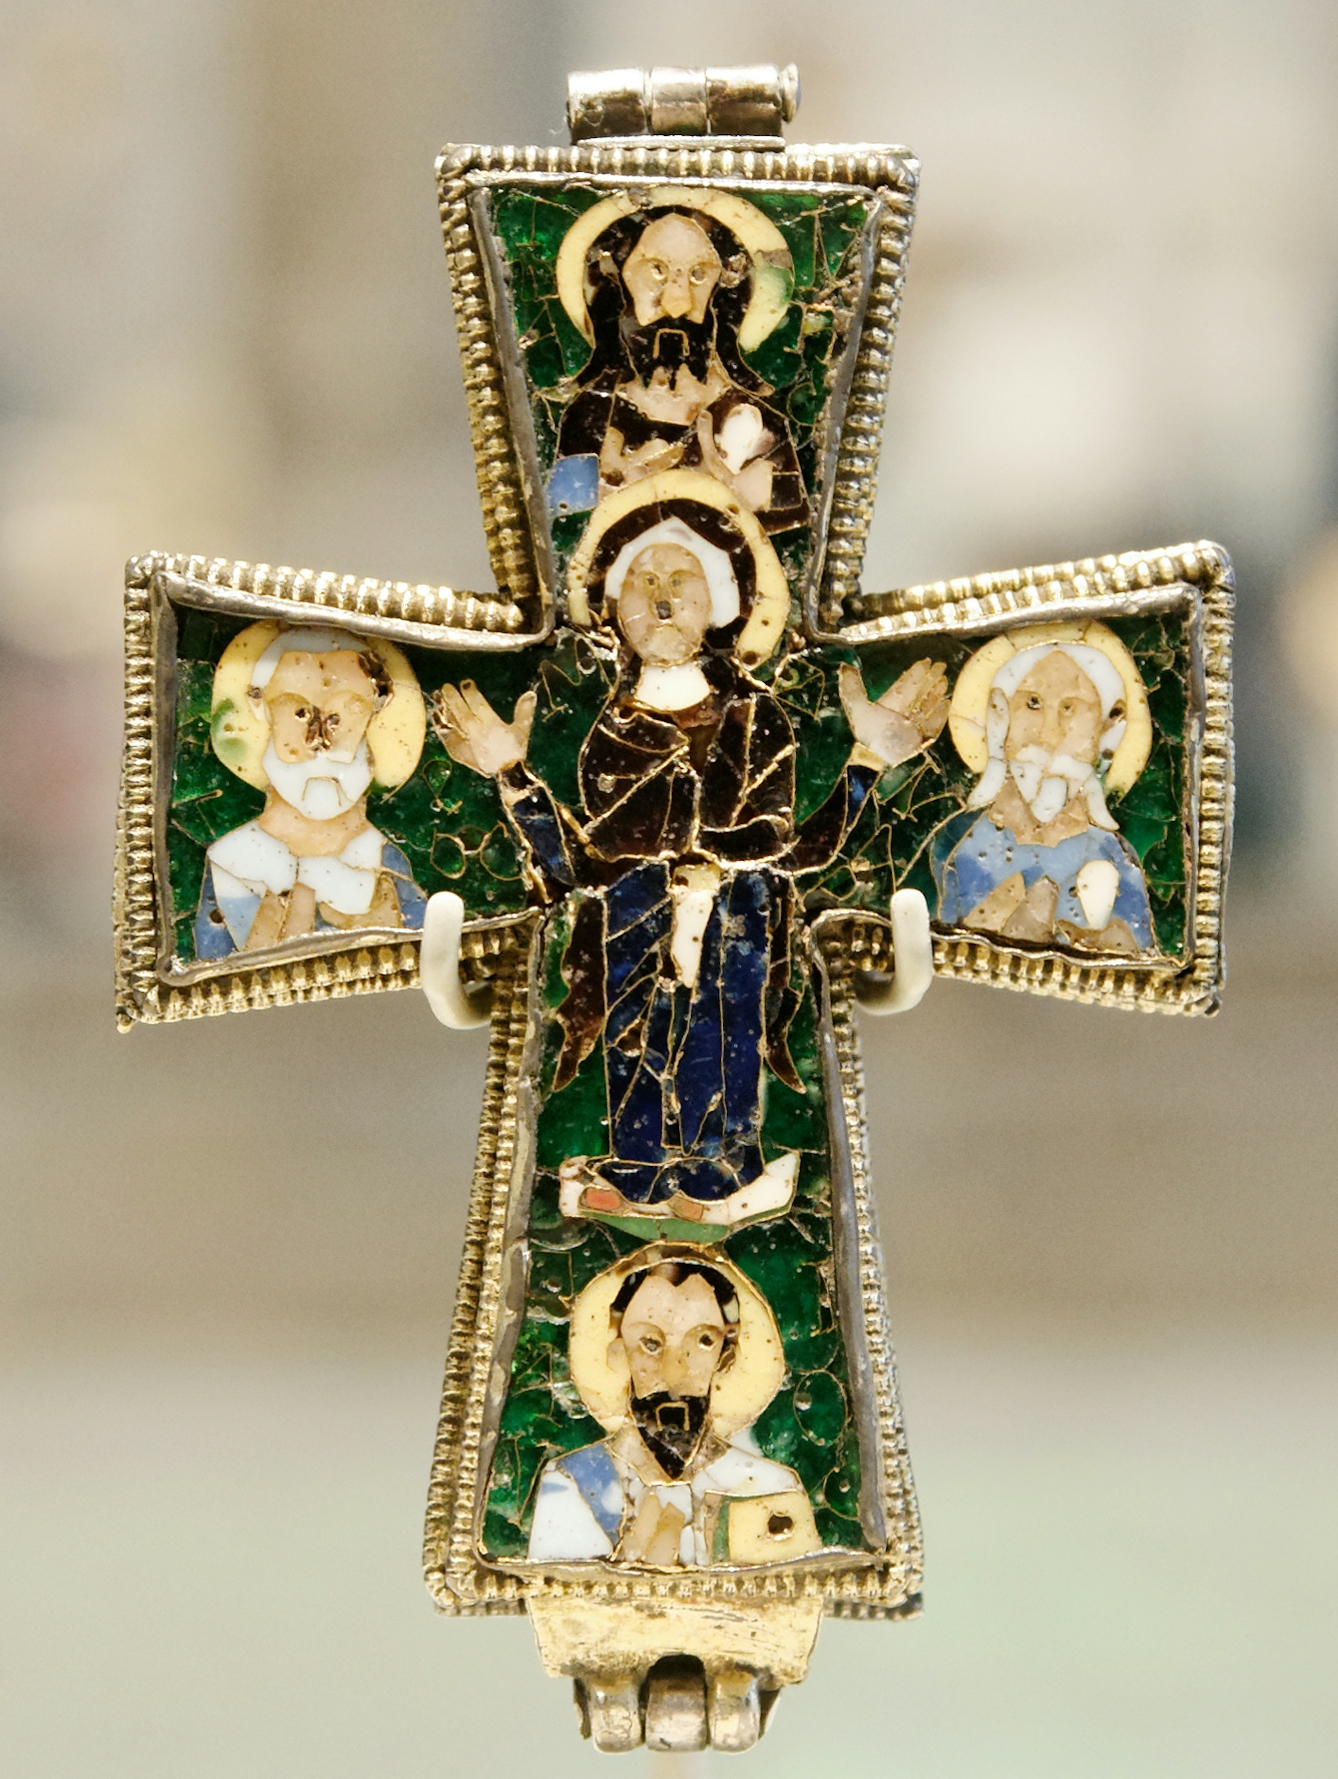 Colour photograph of a gold cross with colourful enamel showing the praying Virgin Mary surrounded by Saints John, Peter, Andrew and Paul.